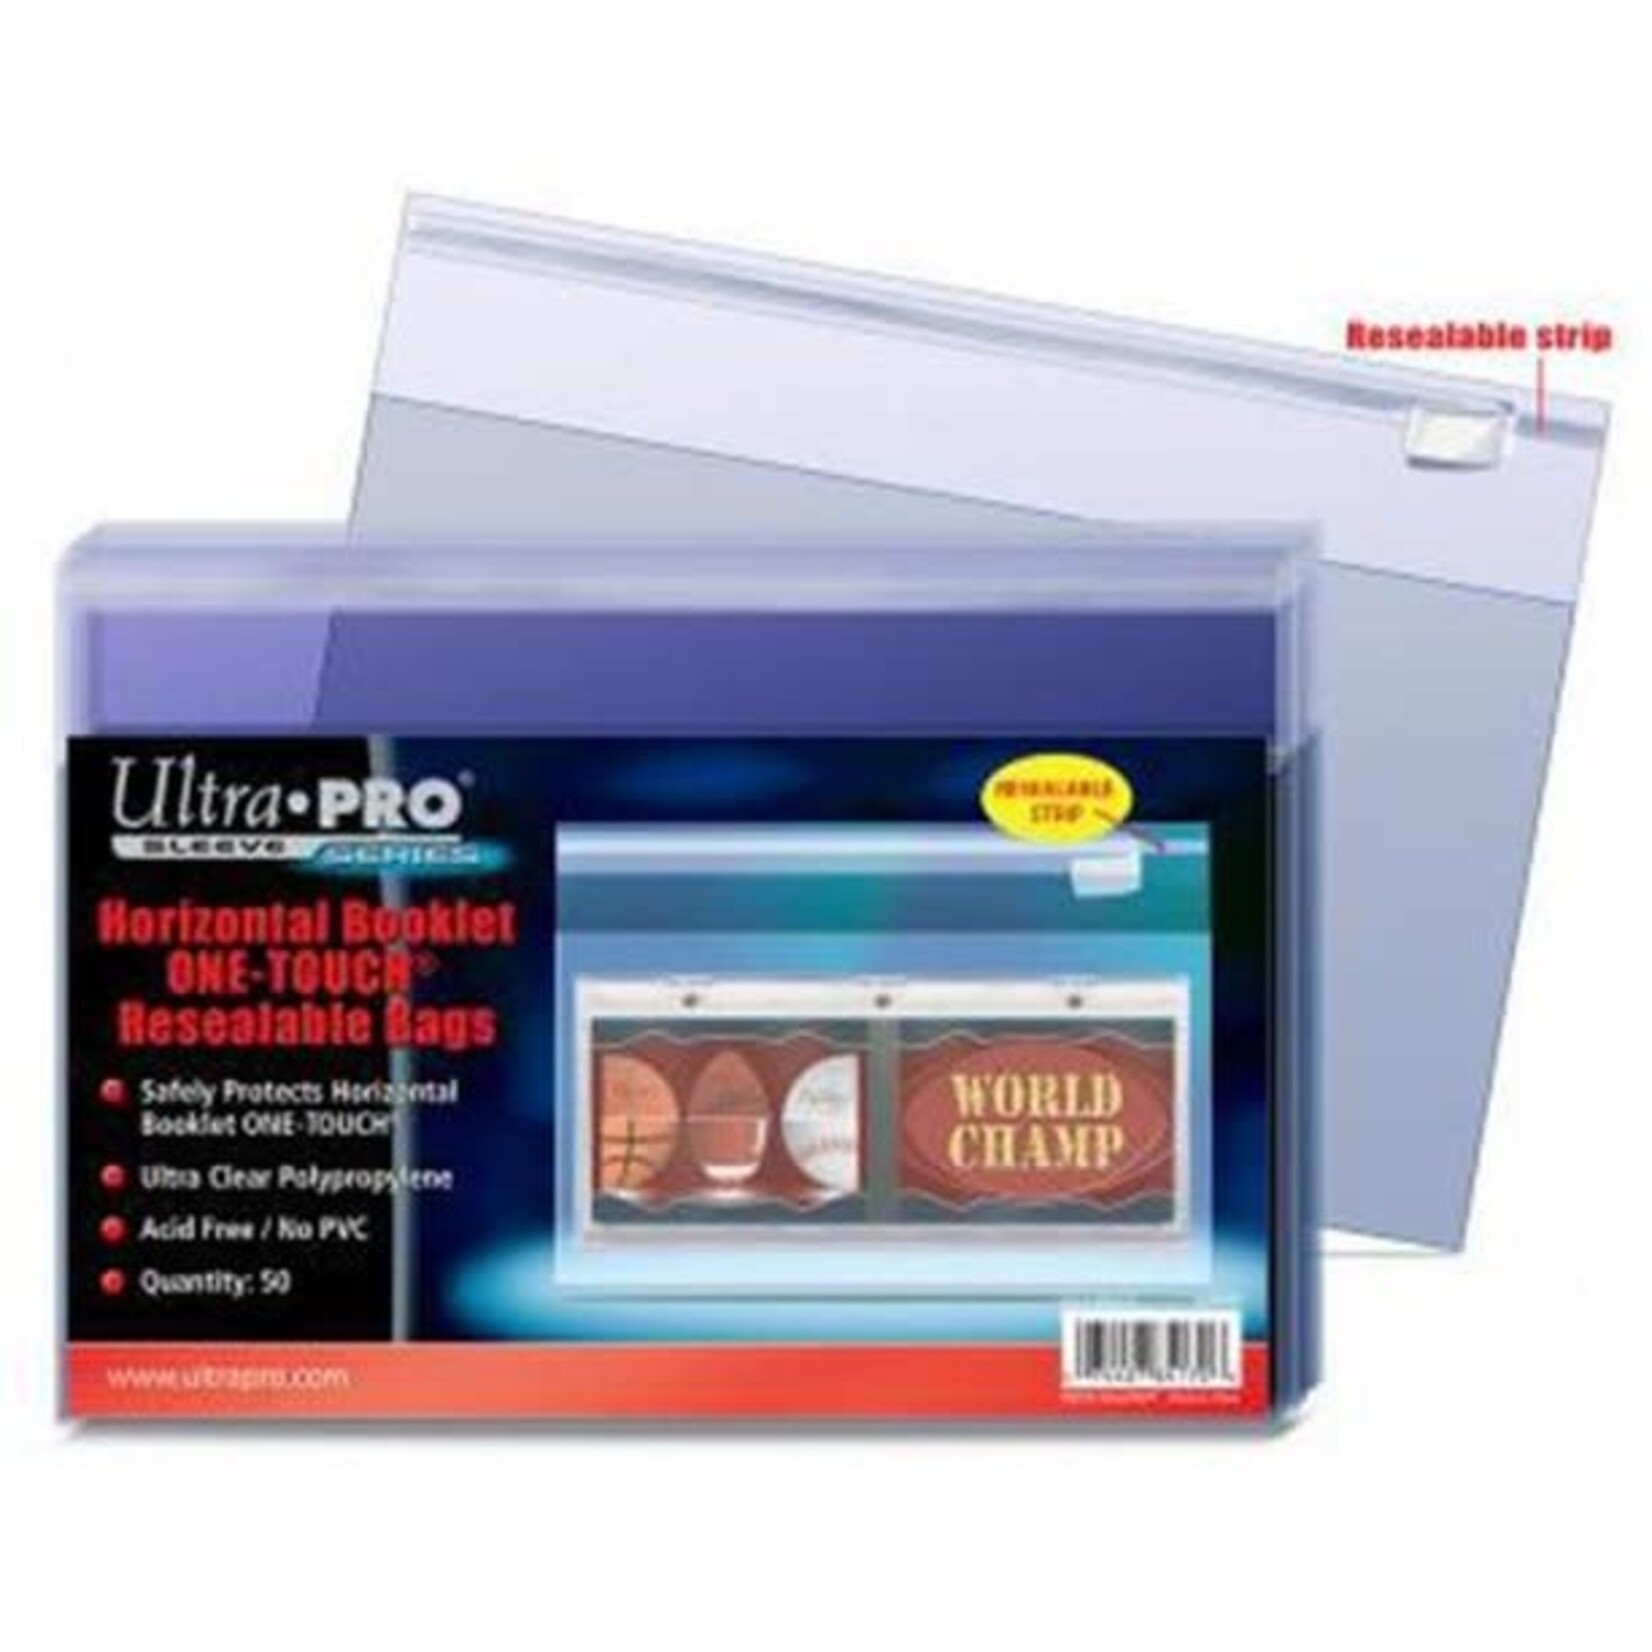 Ultra Pro Ultra Pro Horizontal Booklet One Touch Bag